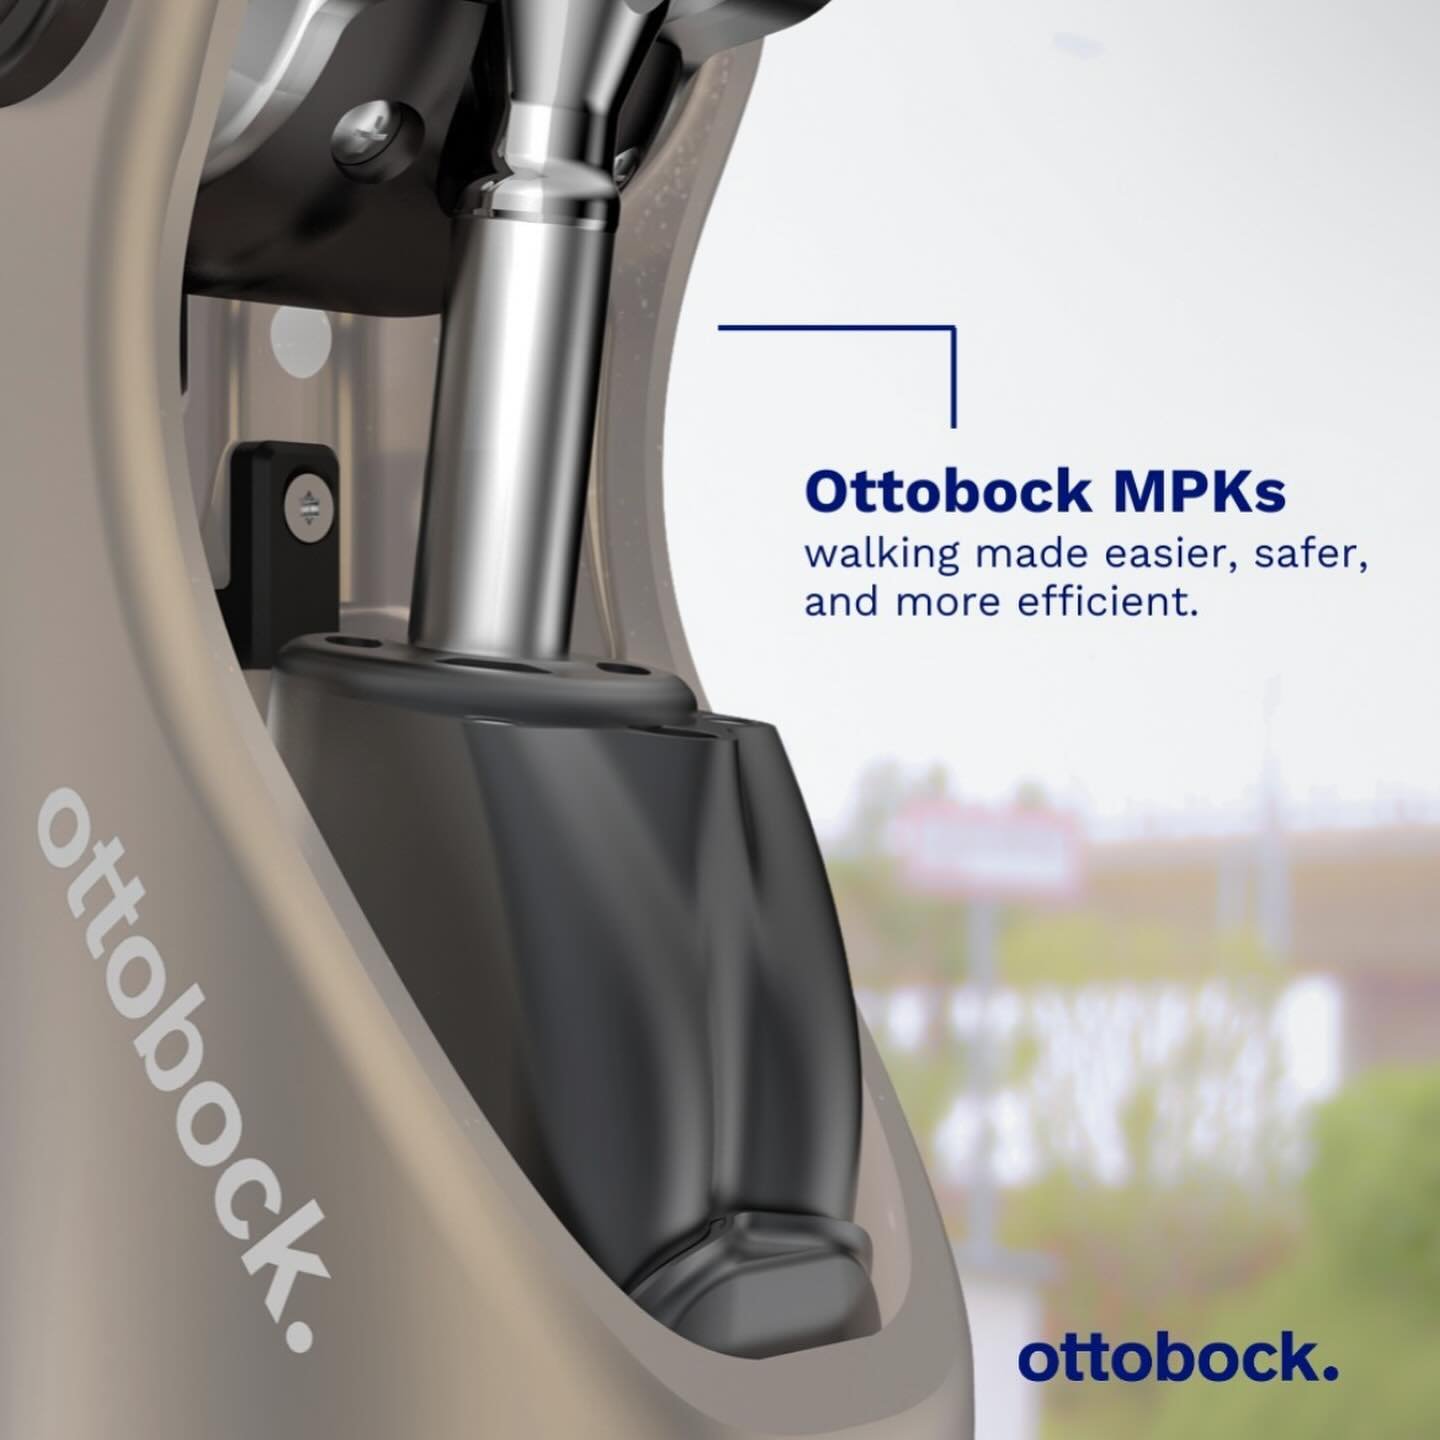 Understanding the mechanics behind microprocessor knees is key to embracing their transformative benefits.

How do MPKs work? 🤔
Unlike mechanical knees, which rely on basic mechanisms, microprocessor knees utilize advanced technology to adapt to you